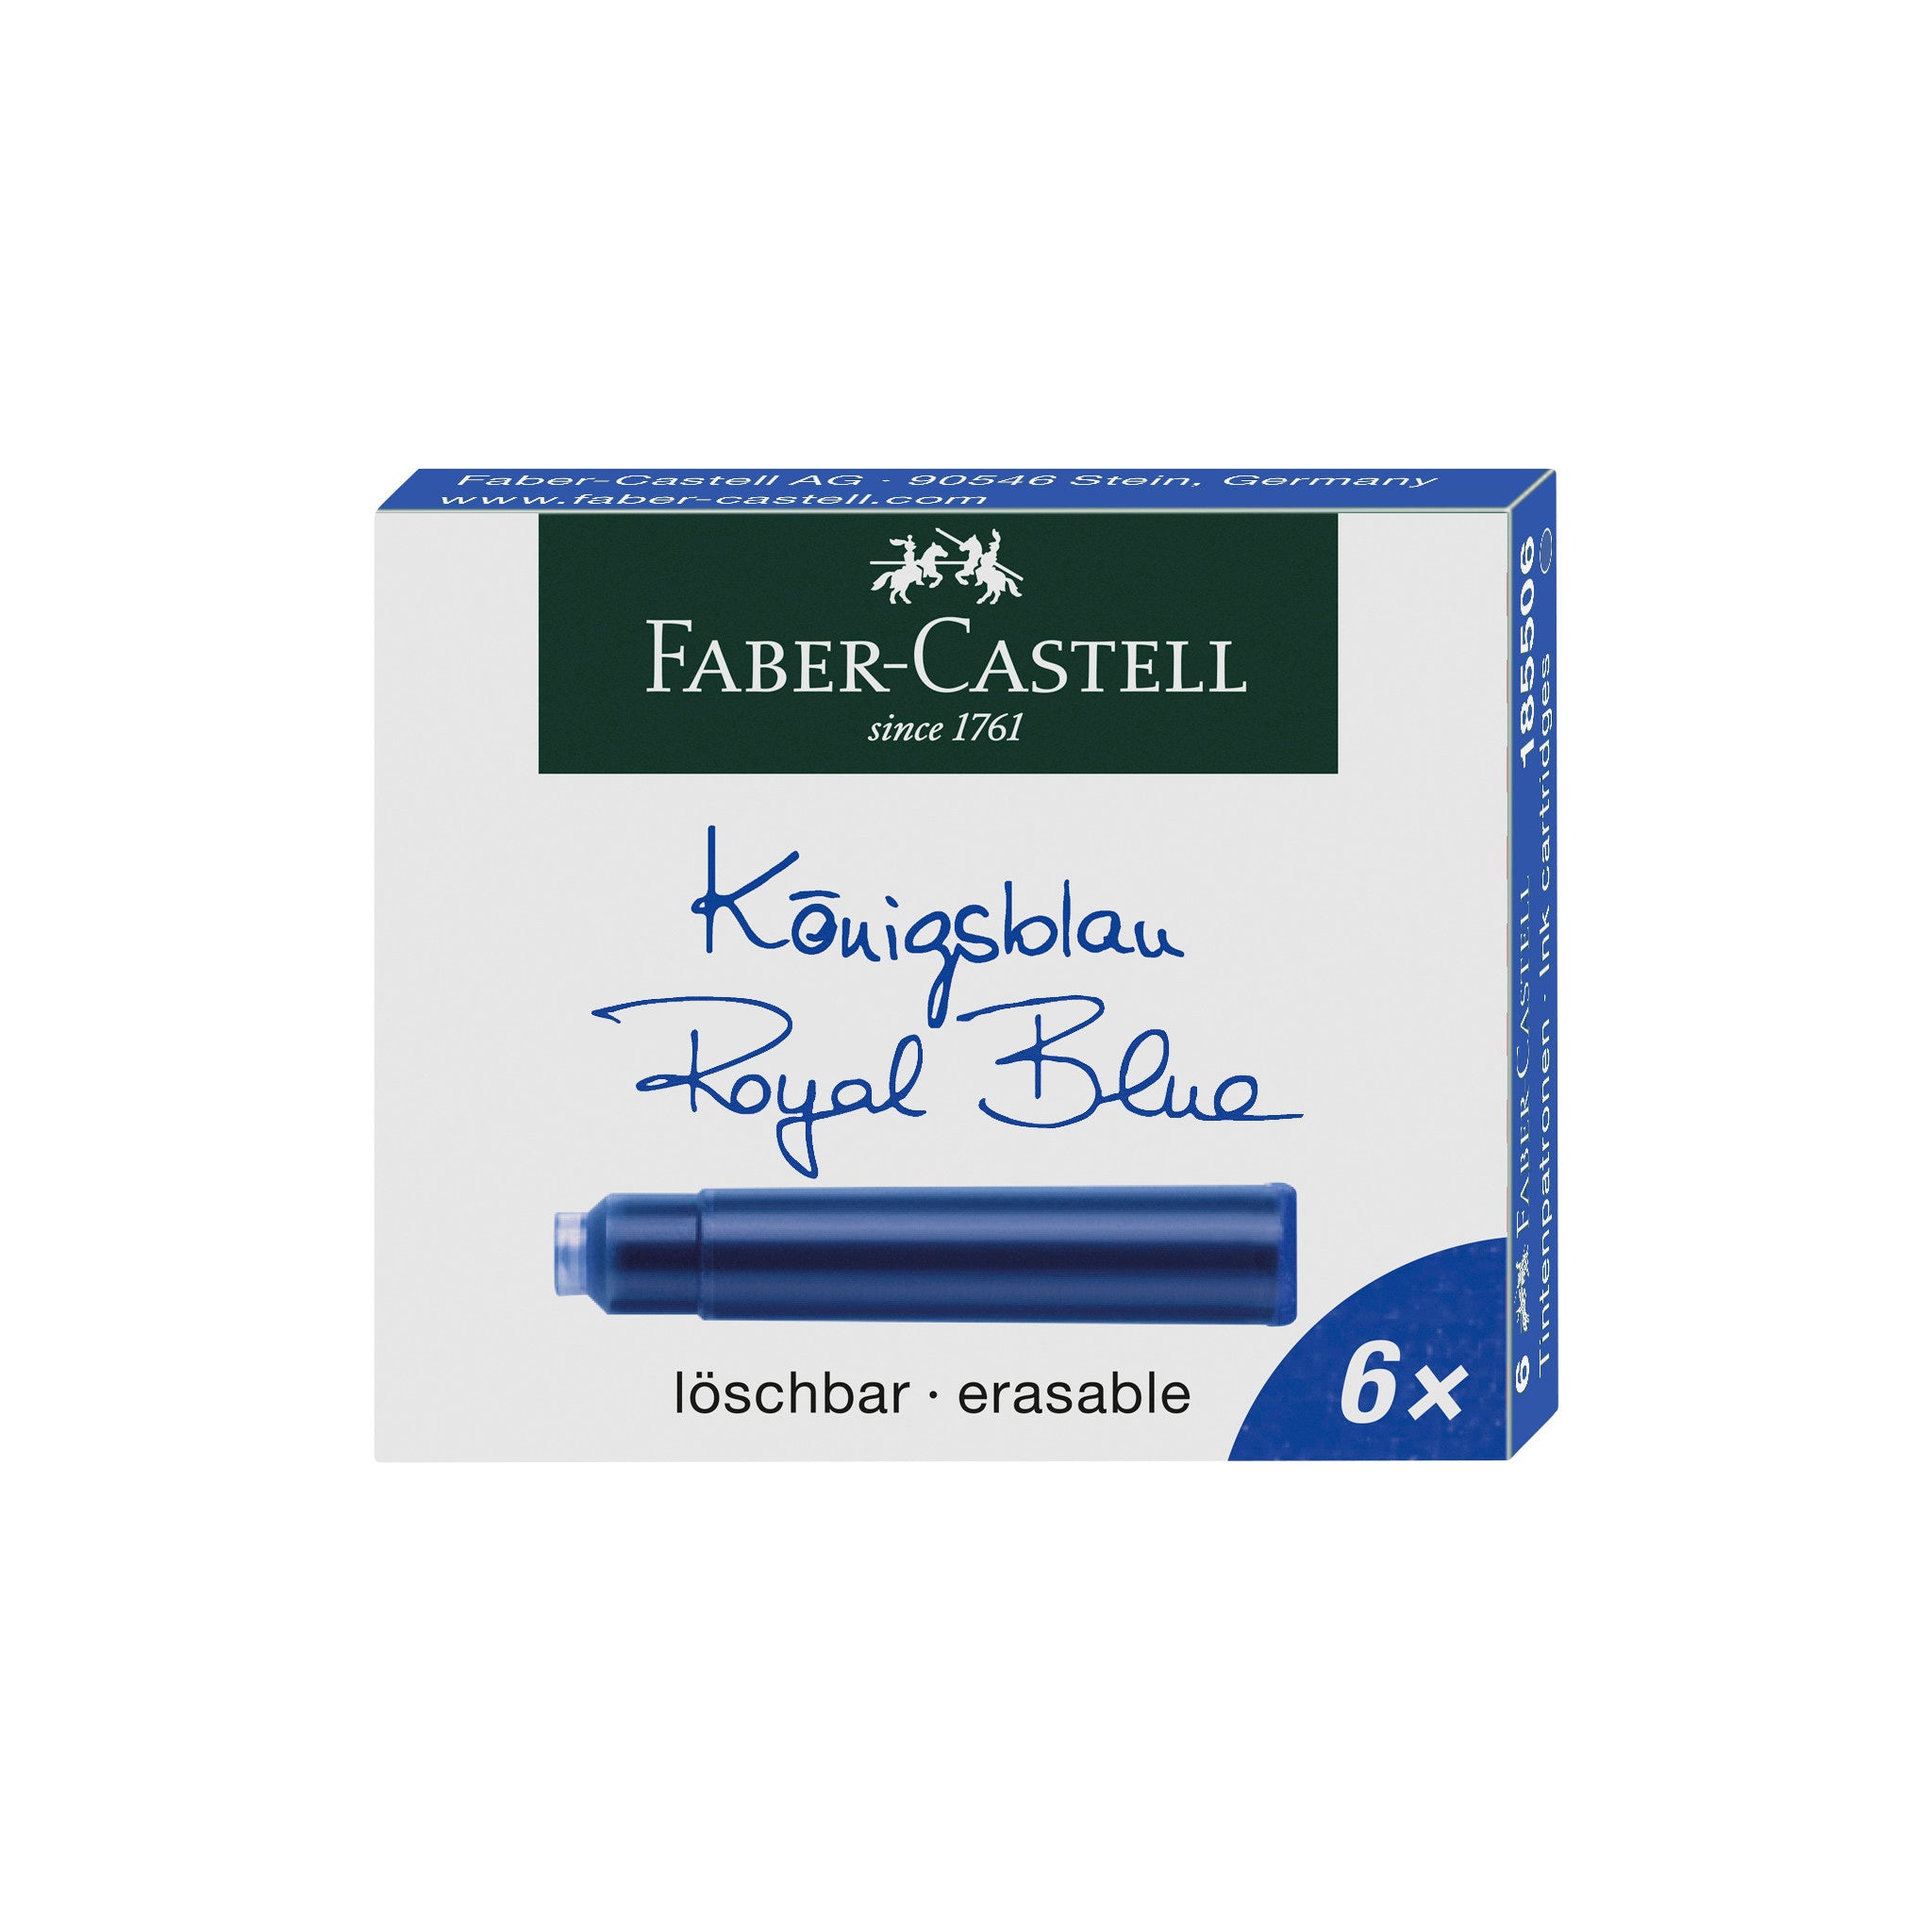 Faber-Castell 185506 Ink Cartridges Blue, Box of 6